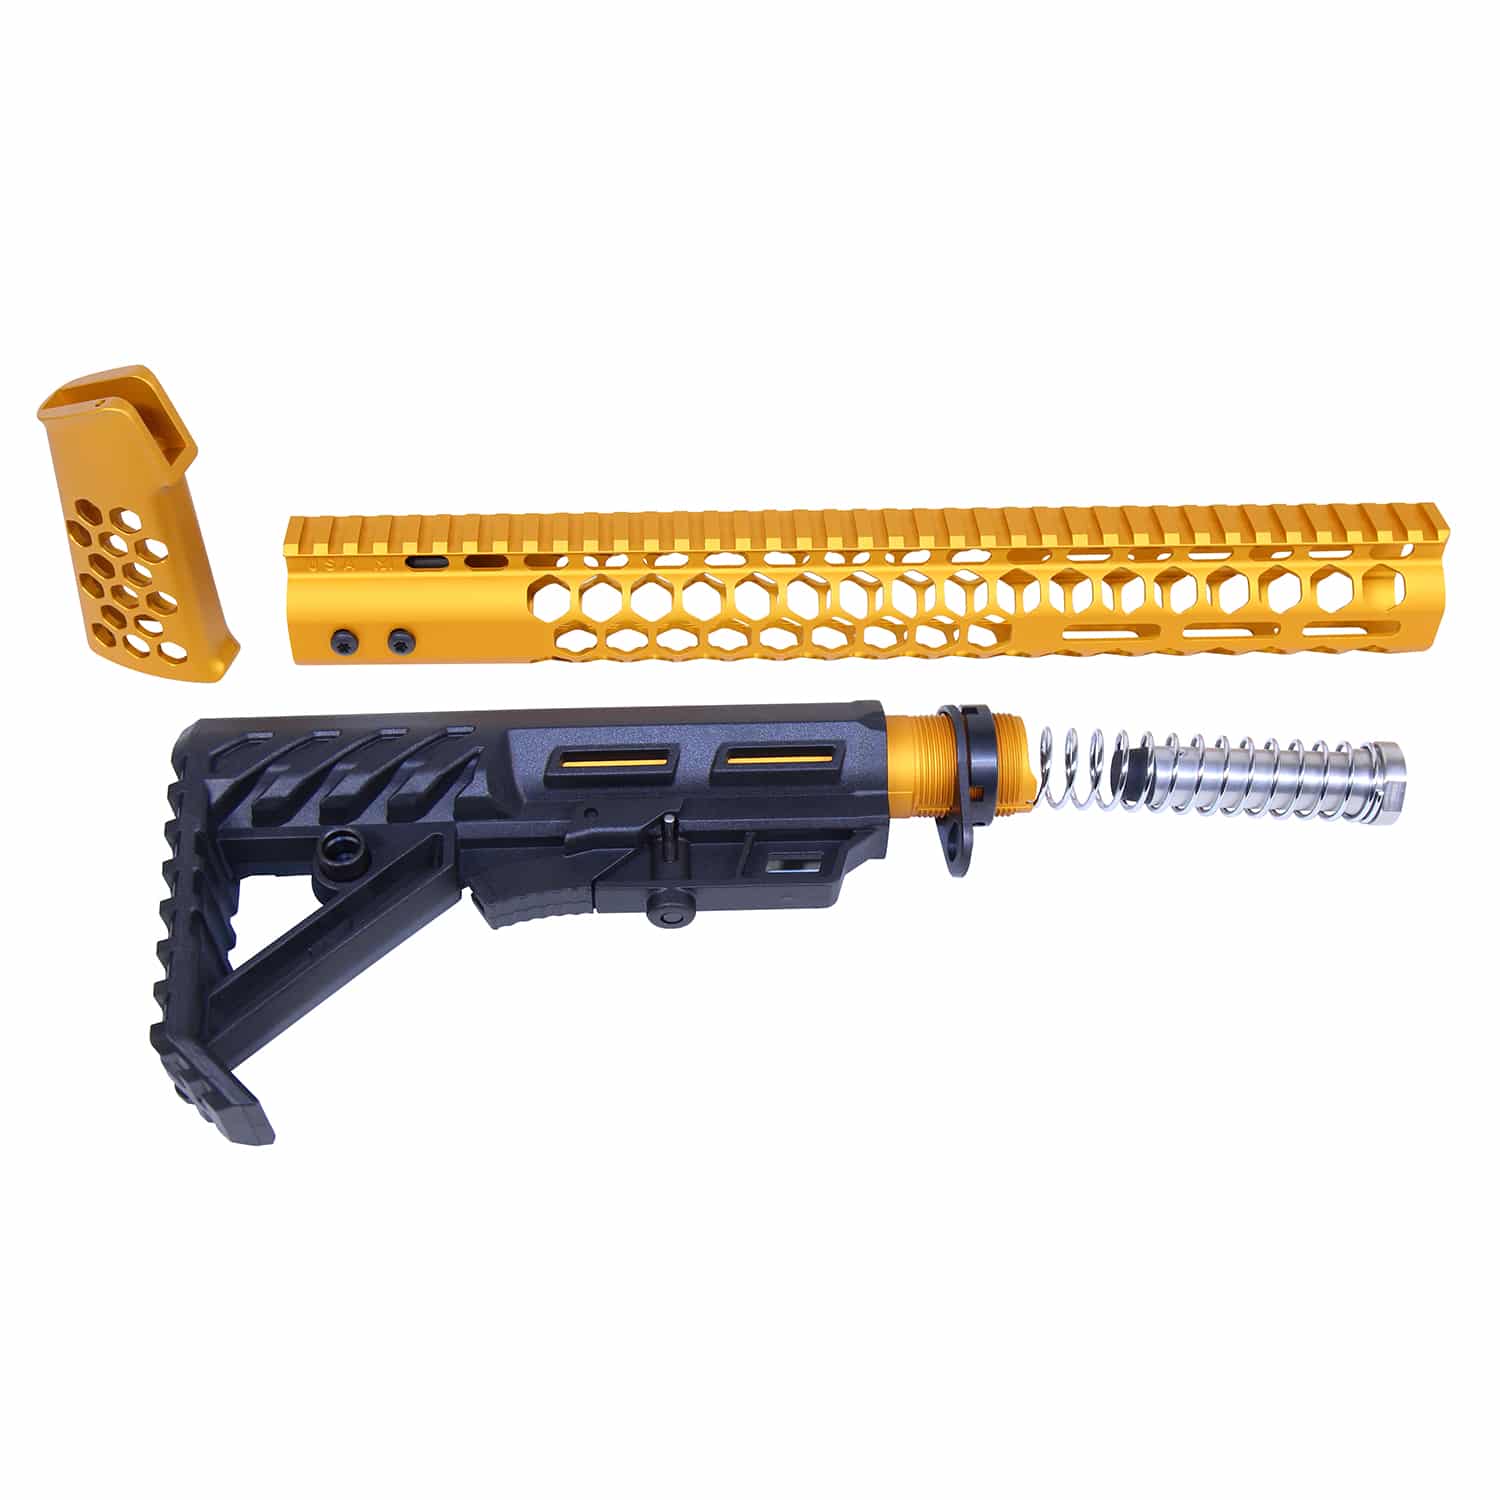 AR-15 Honeycomb Series Complete Rifle Furniture Set in Anodized Orange